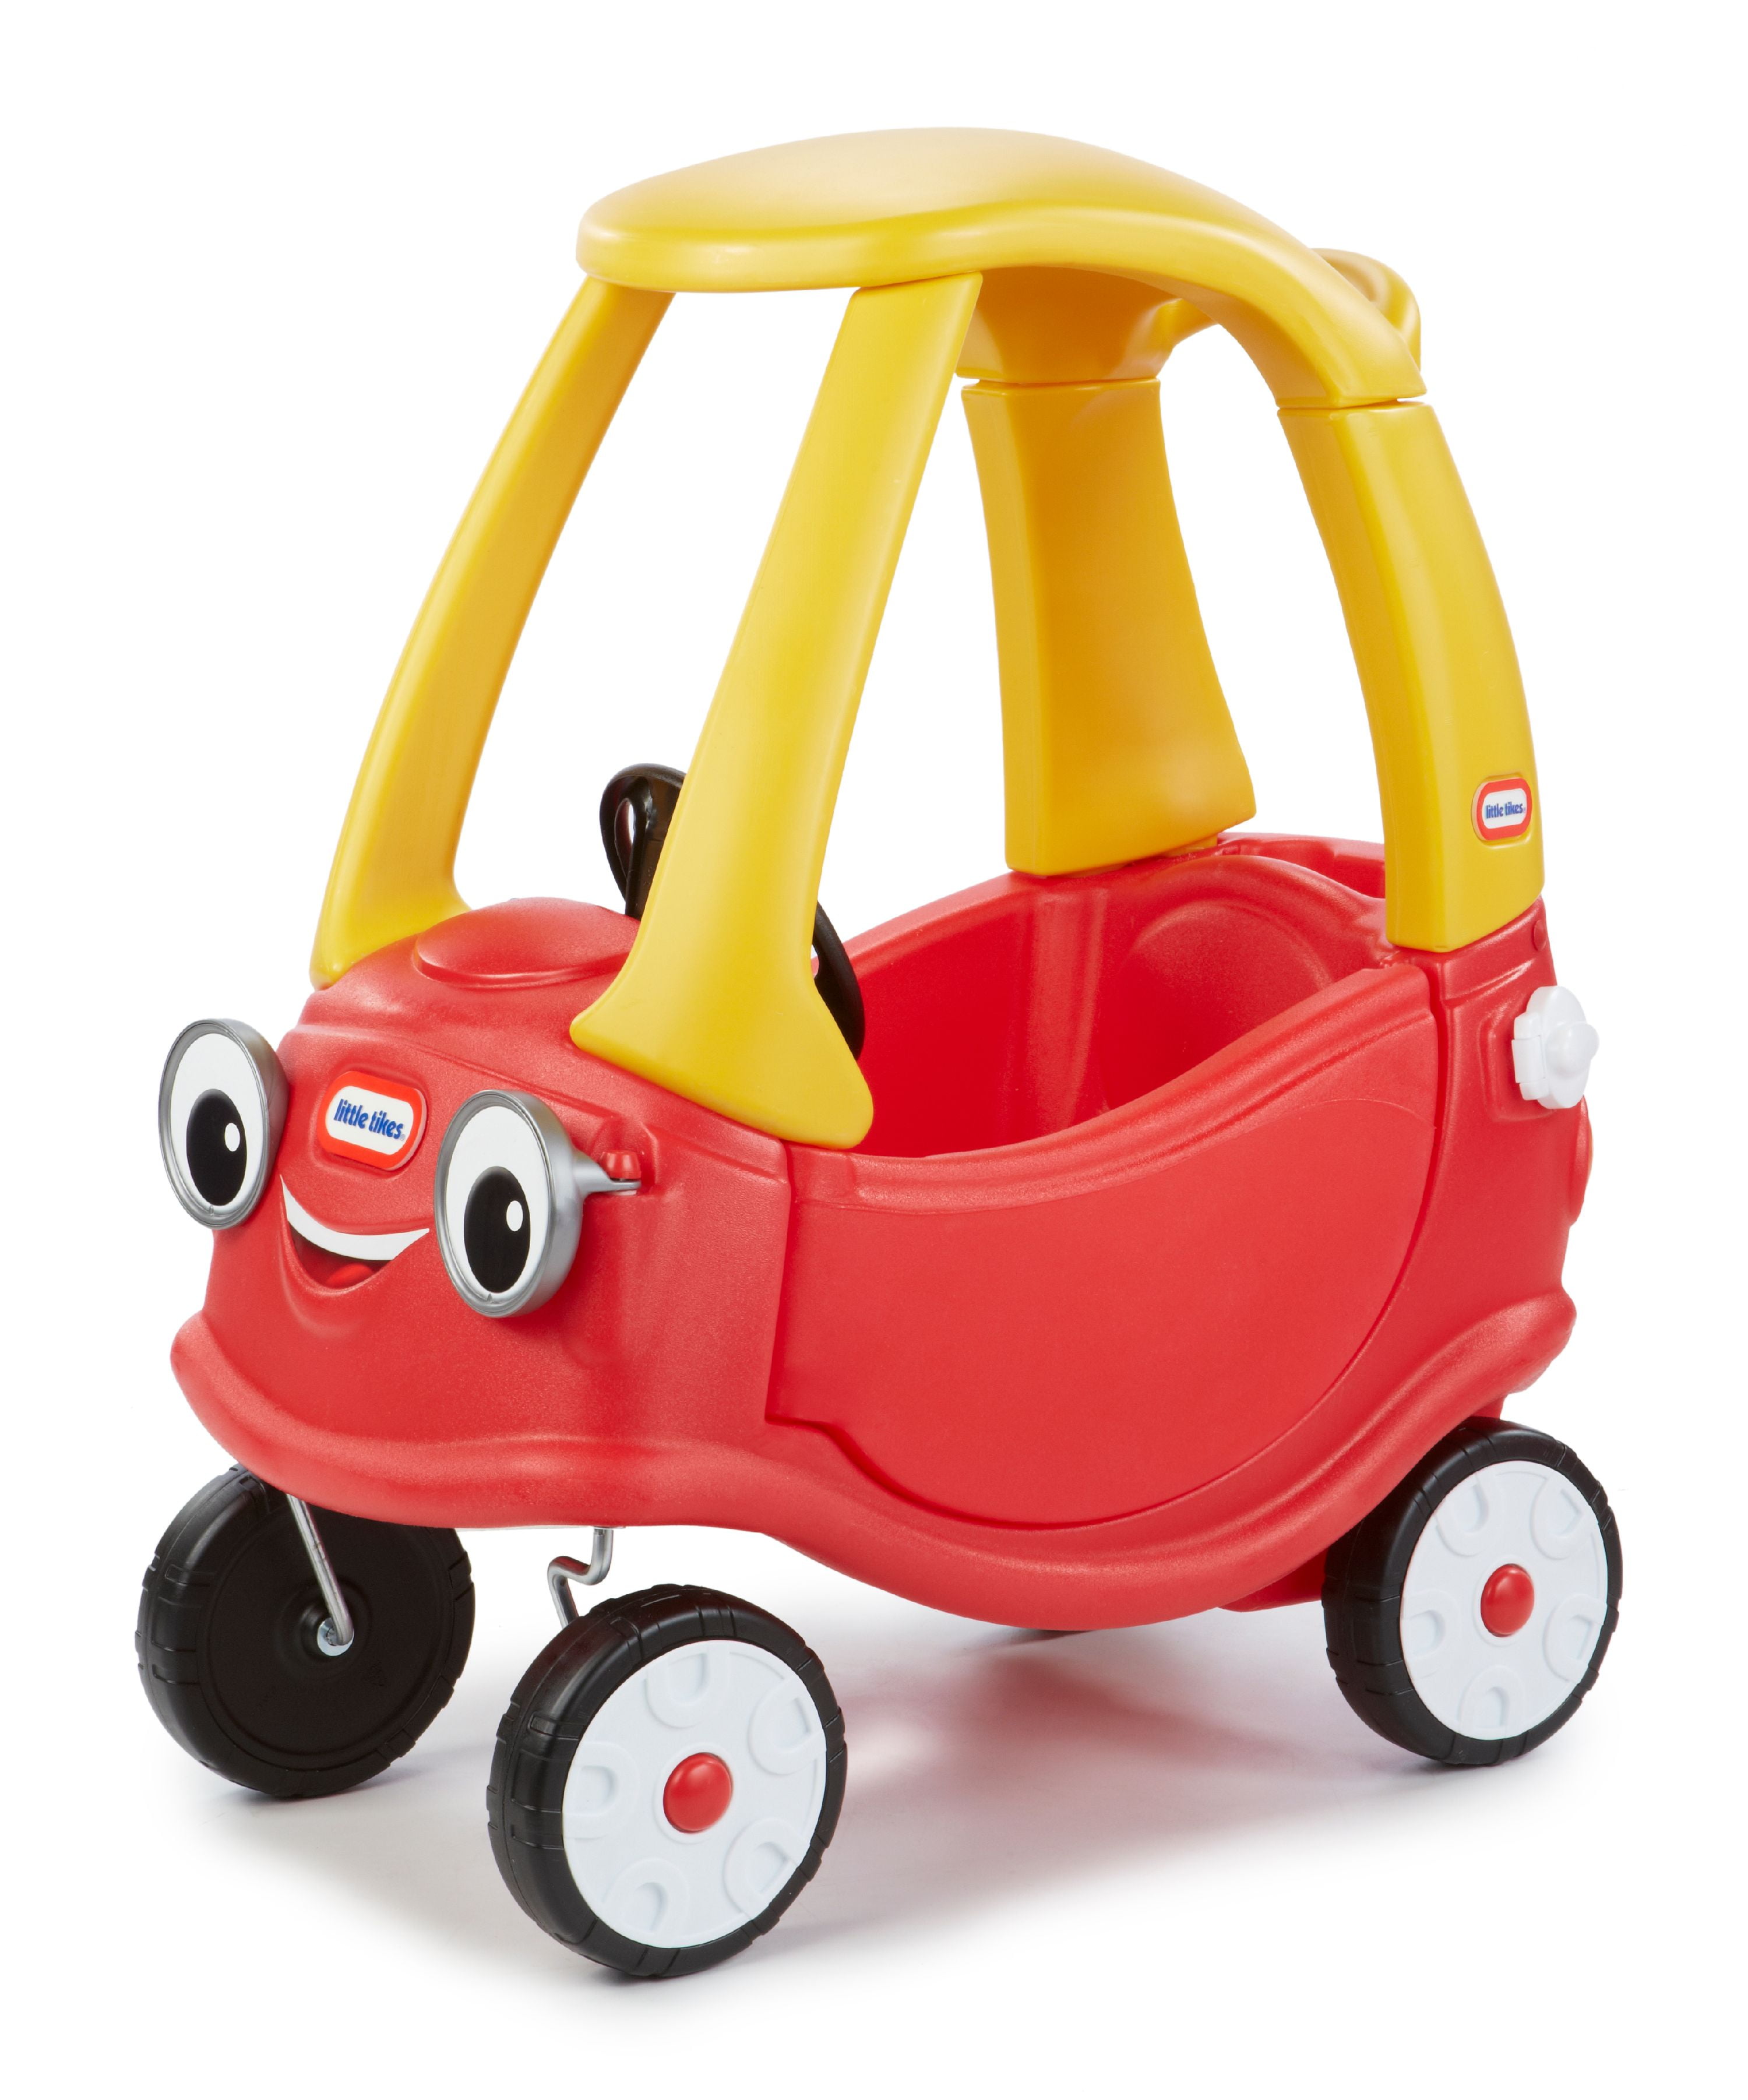 Pak om te zetten Lief Kwaadaardig Little Tikes Cozy Coupe Ride On Toy for Toddlers and Kids - Walmart.com